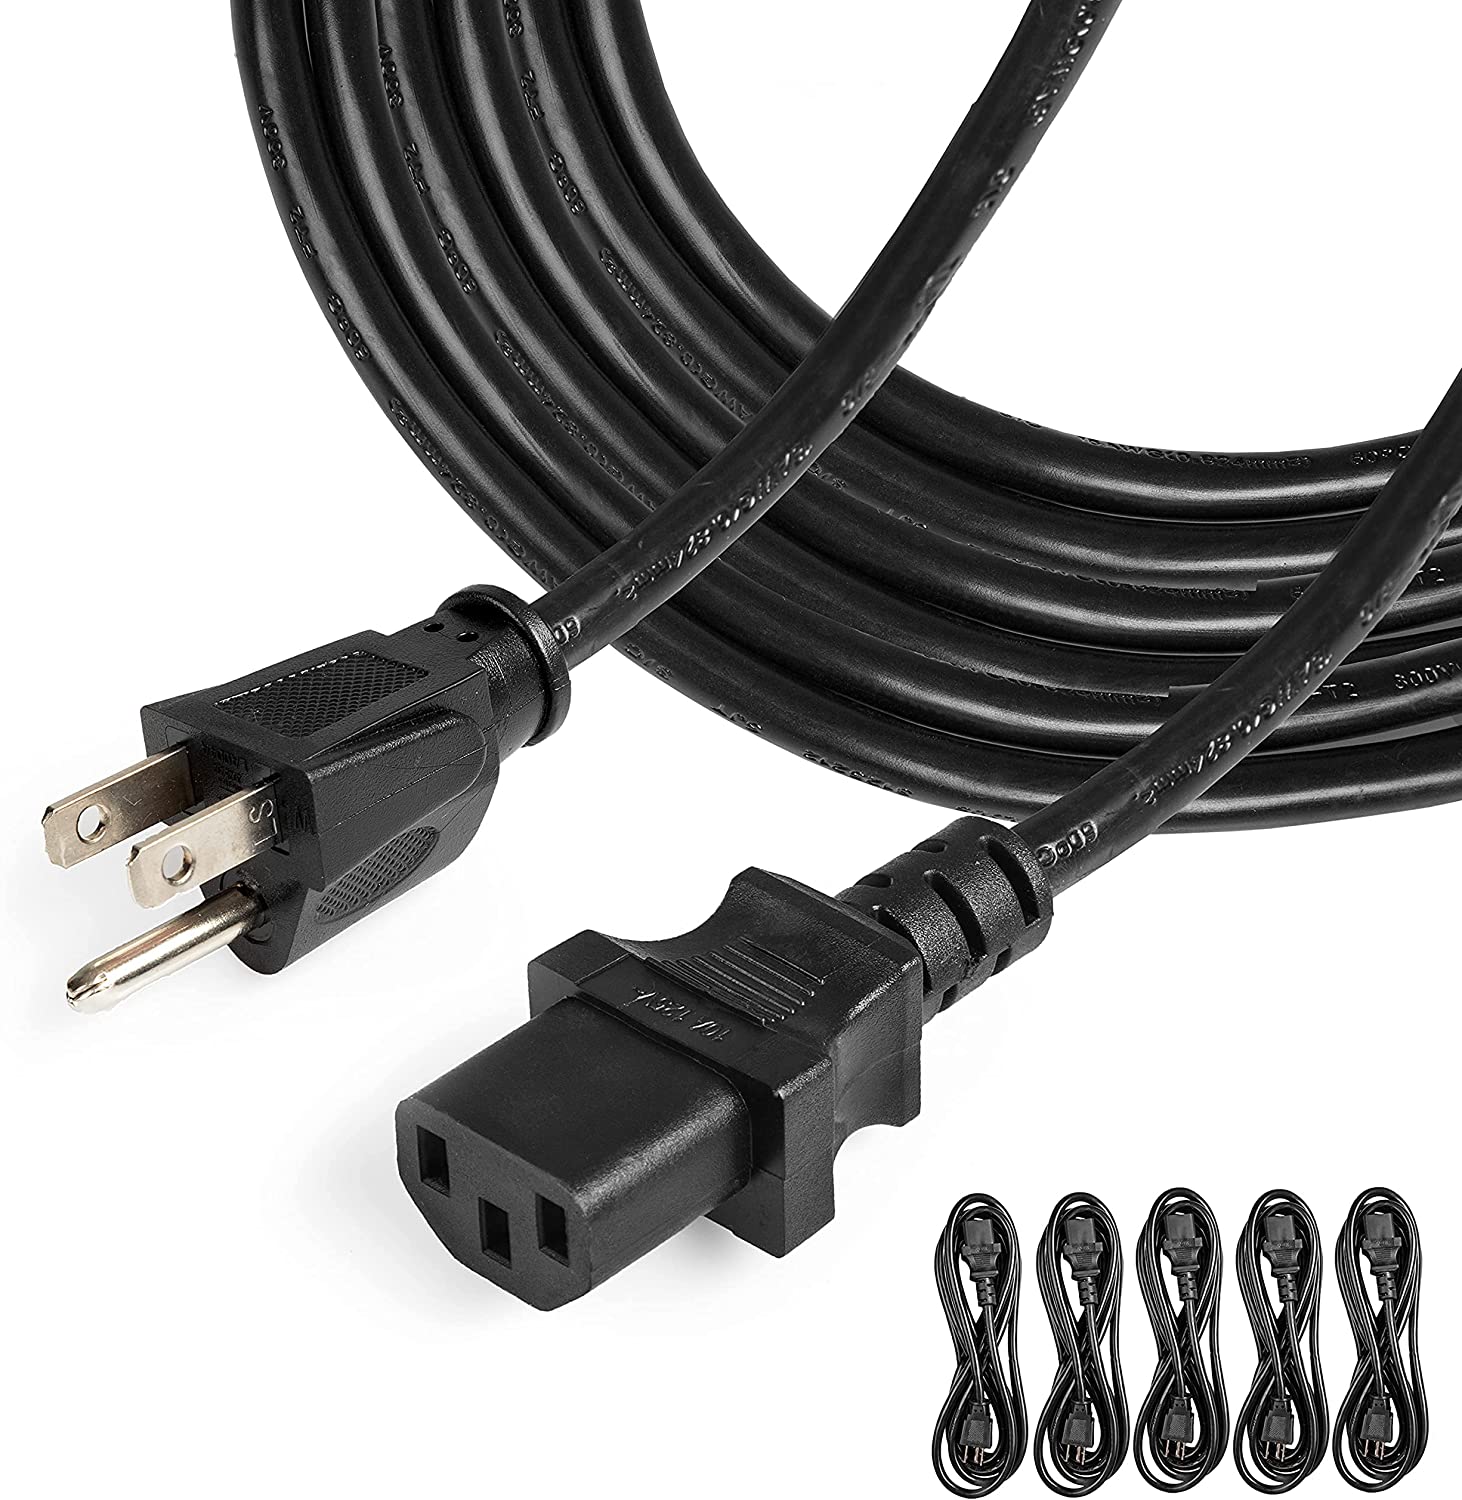 5 Pack of 10 Ft Power Cords for TV Computer or Monitor (NEMA 5-15P to C13) - 18/3 Replacement Audio & Video Power Cable, Black